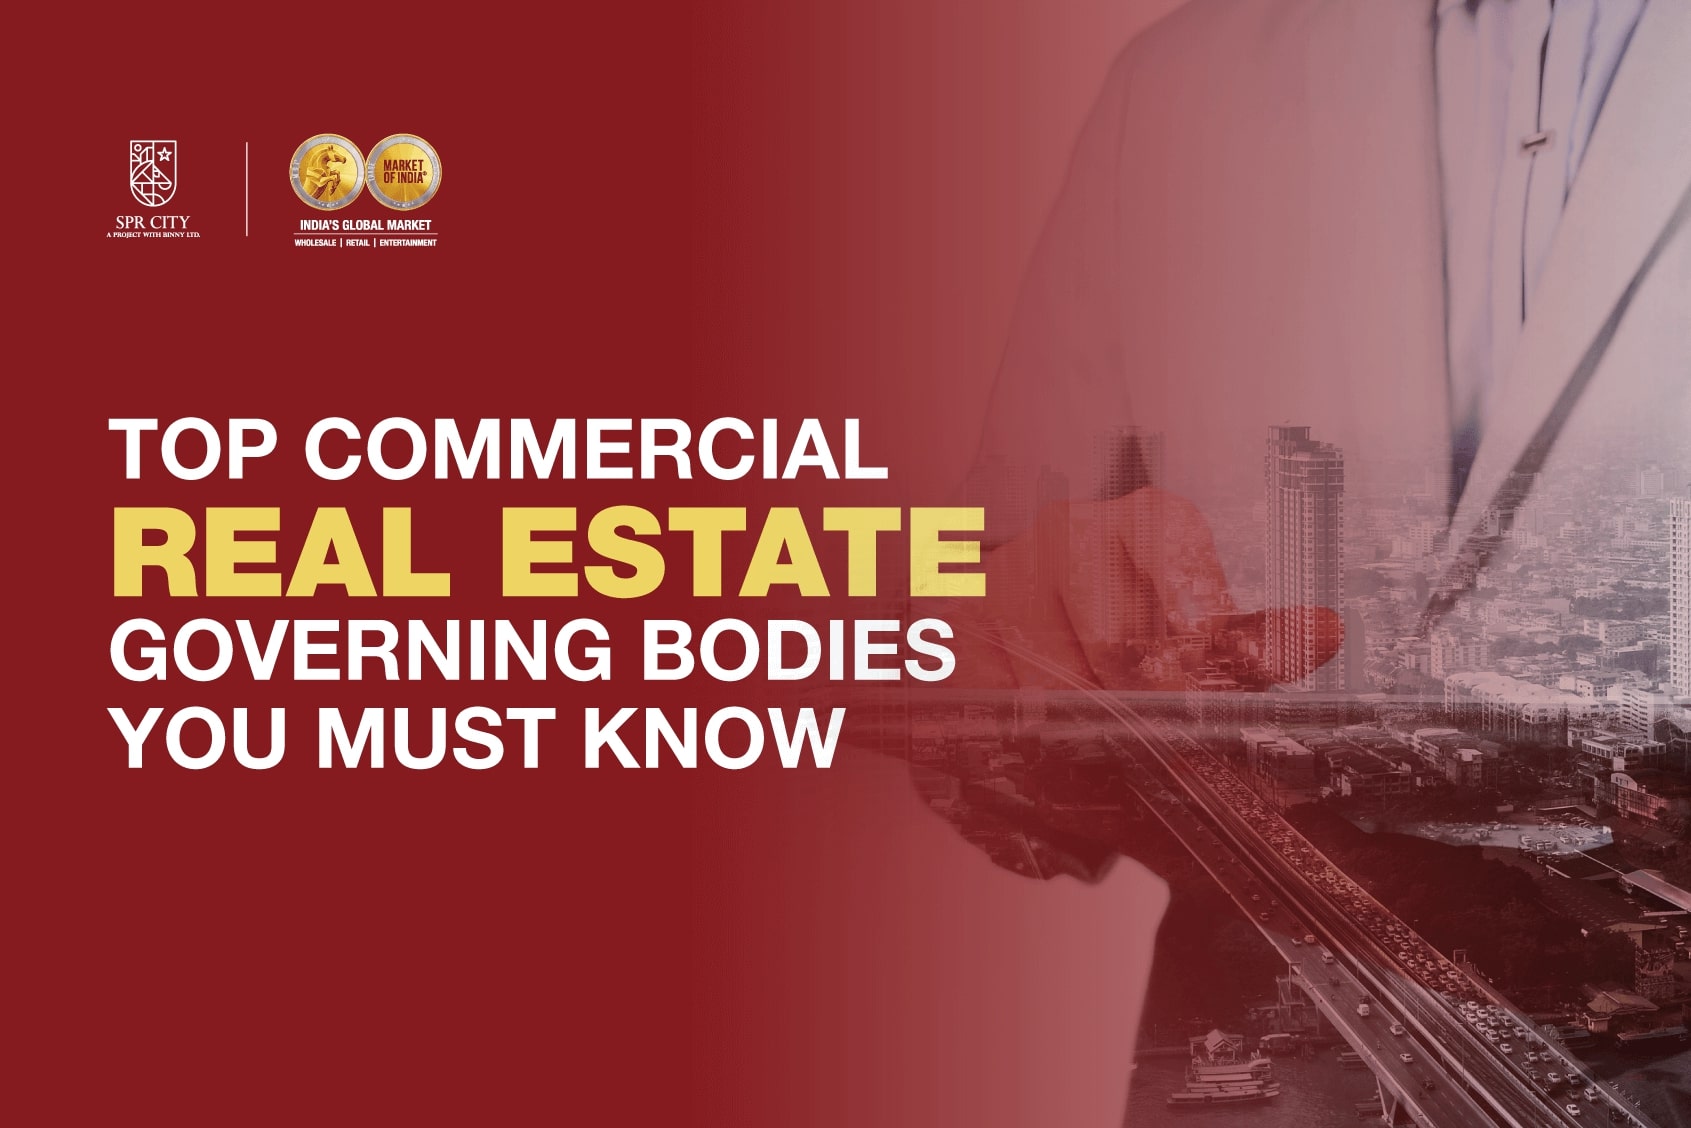 Top Commercial Real Estate Governing Bodies You Must Know